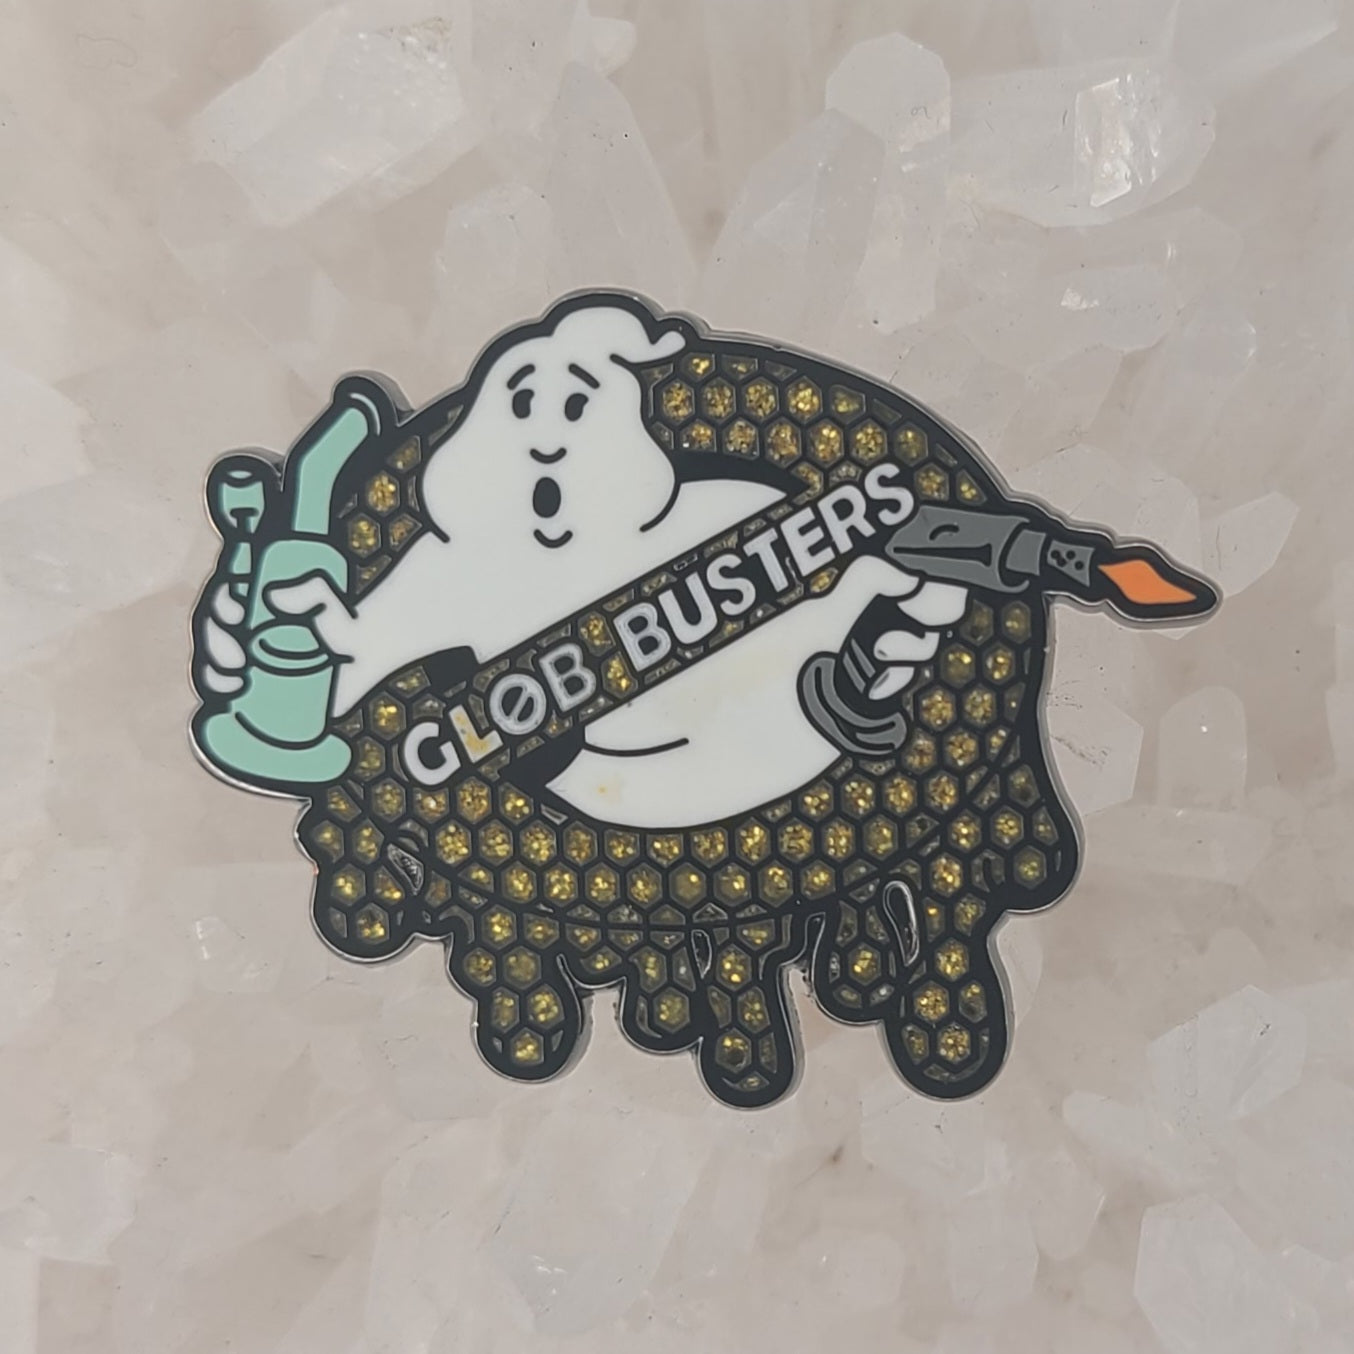 Glob Busters Ghost Hash Oil Busters Dab Weed Enamel Pins Hat Pins Lapel Pin Brooch Badge Festival Pin